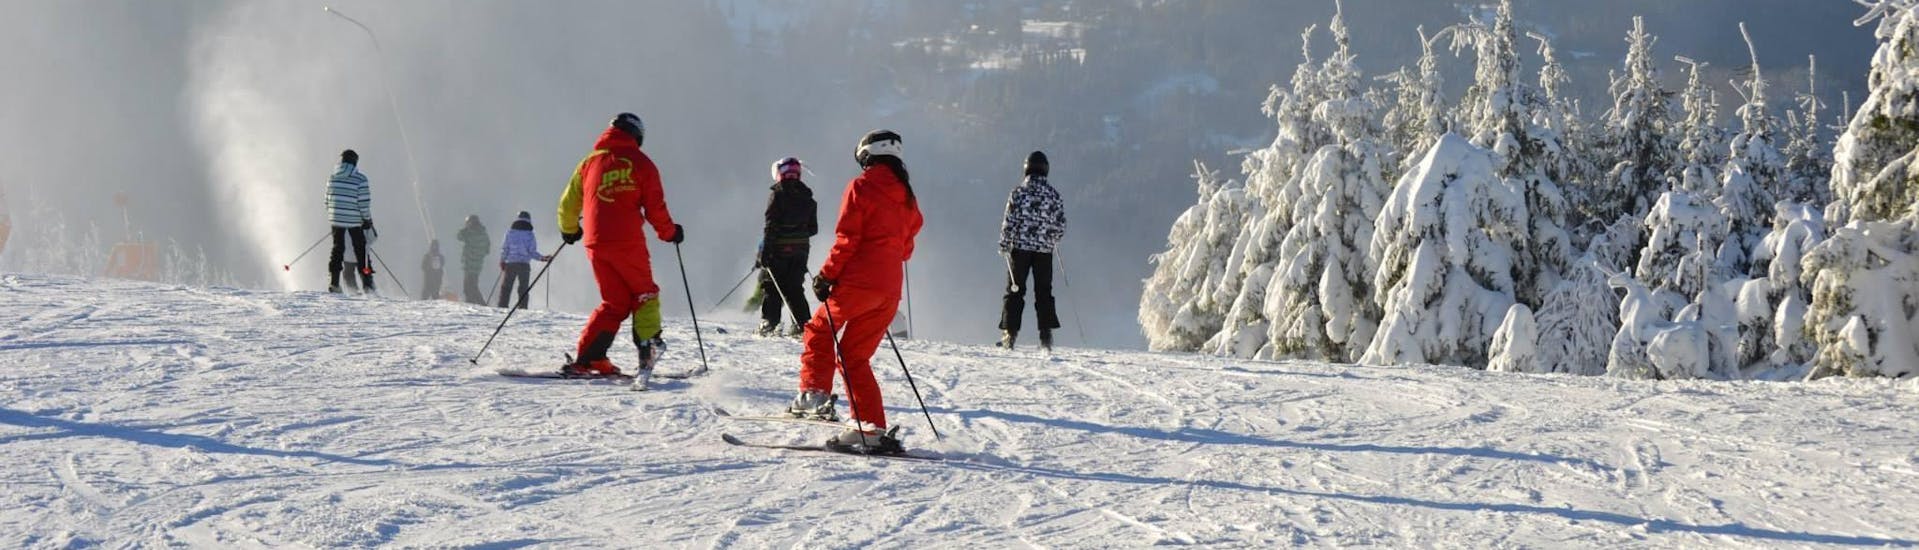 ski-lessons-for-adults---small-group---all-levels-1-hero